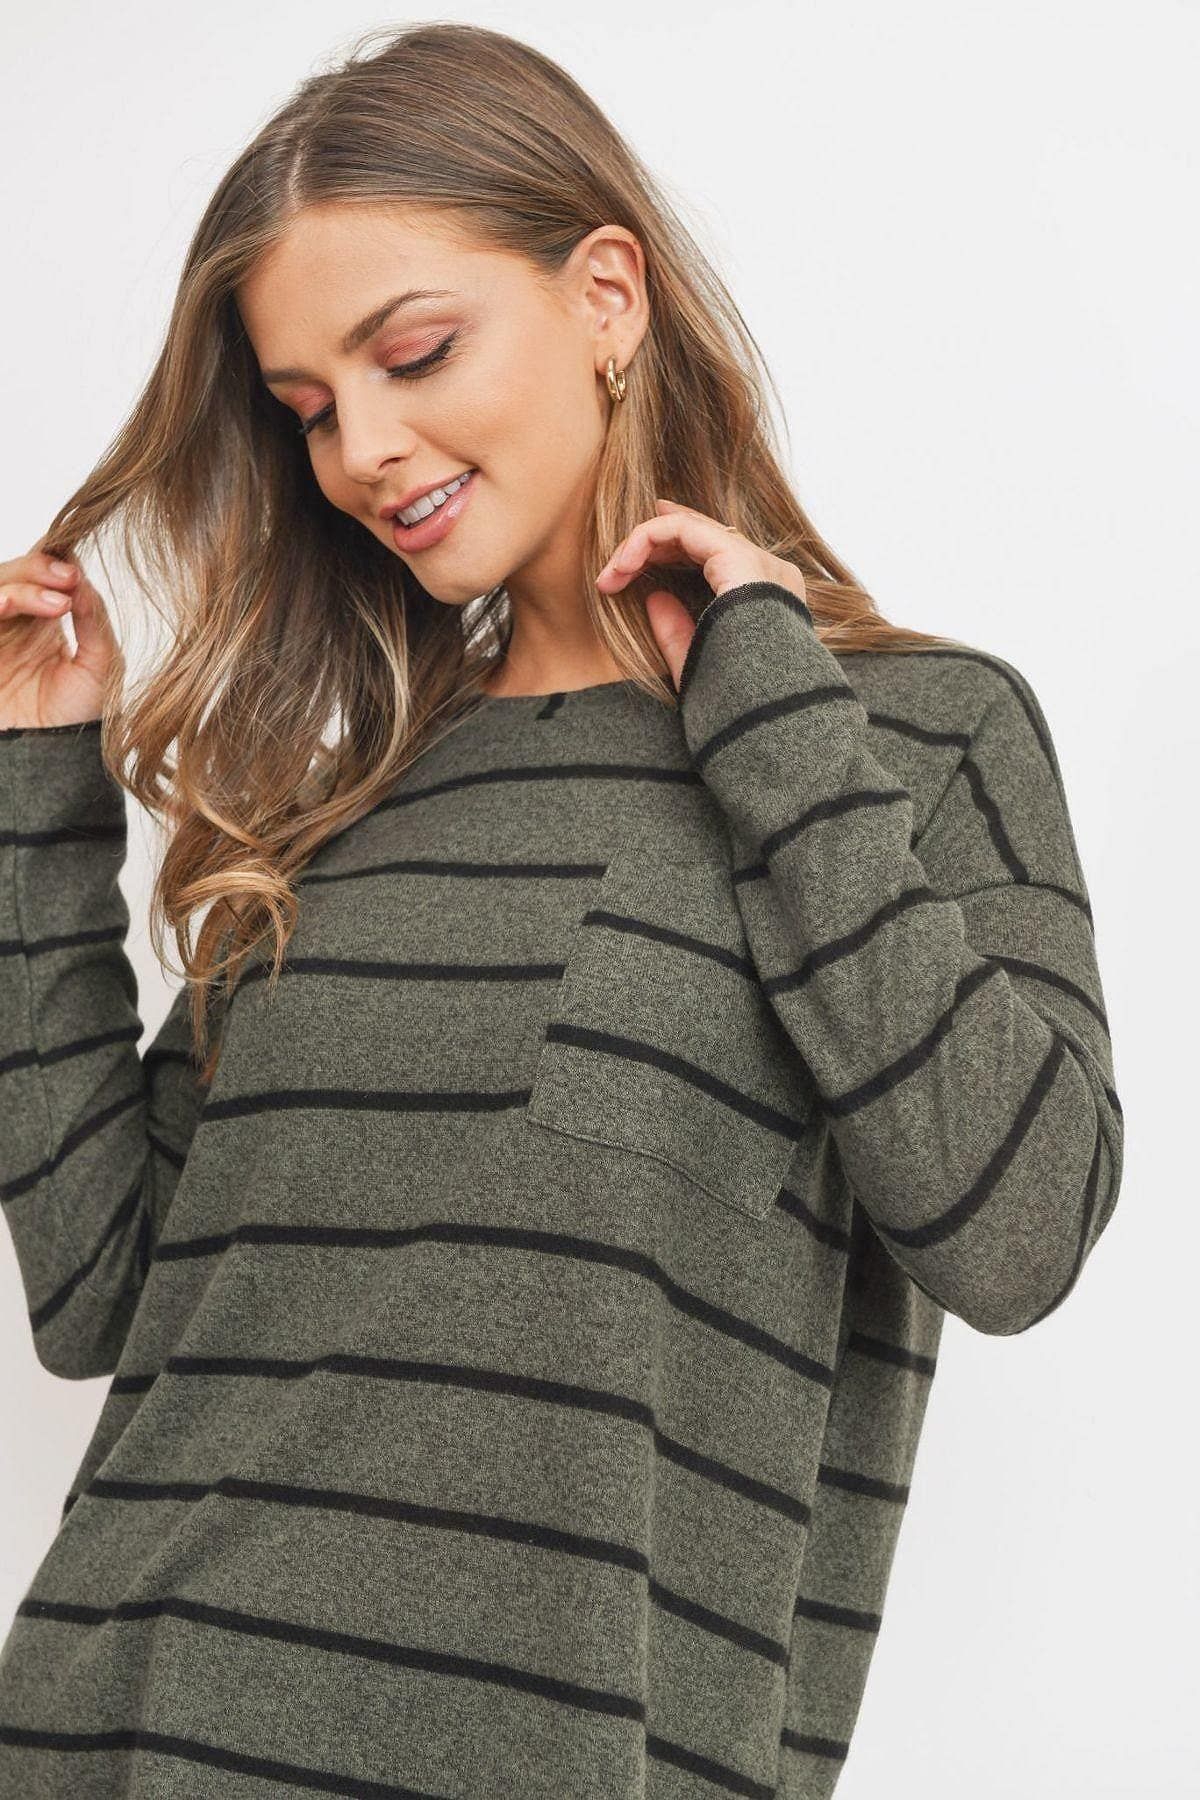 Olive Long Sleeve Stripe Top - Shopping Therapy, LLC Shirts & Tops